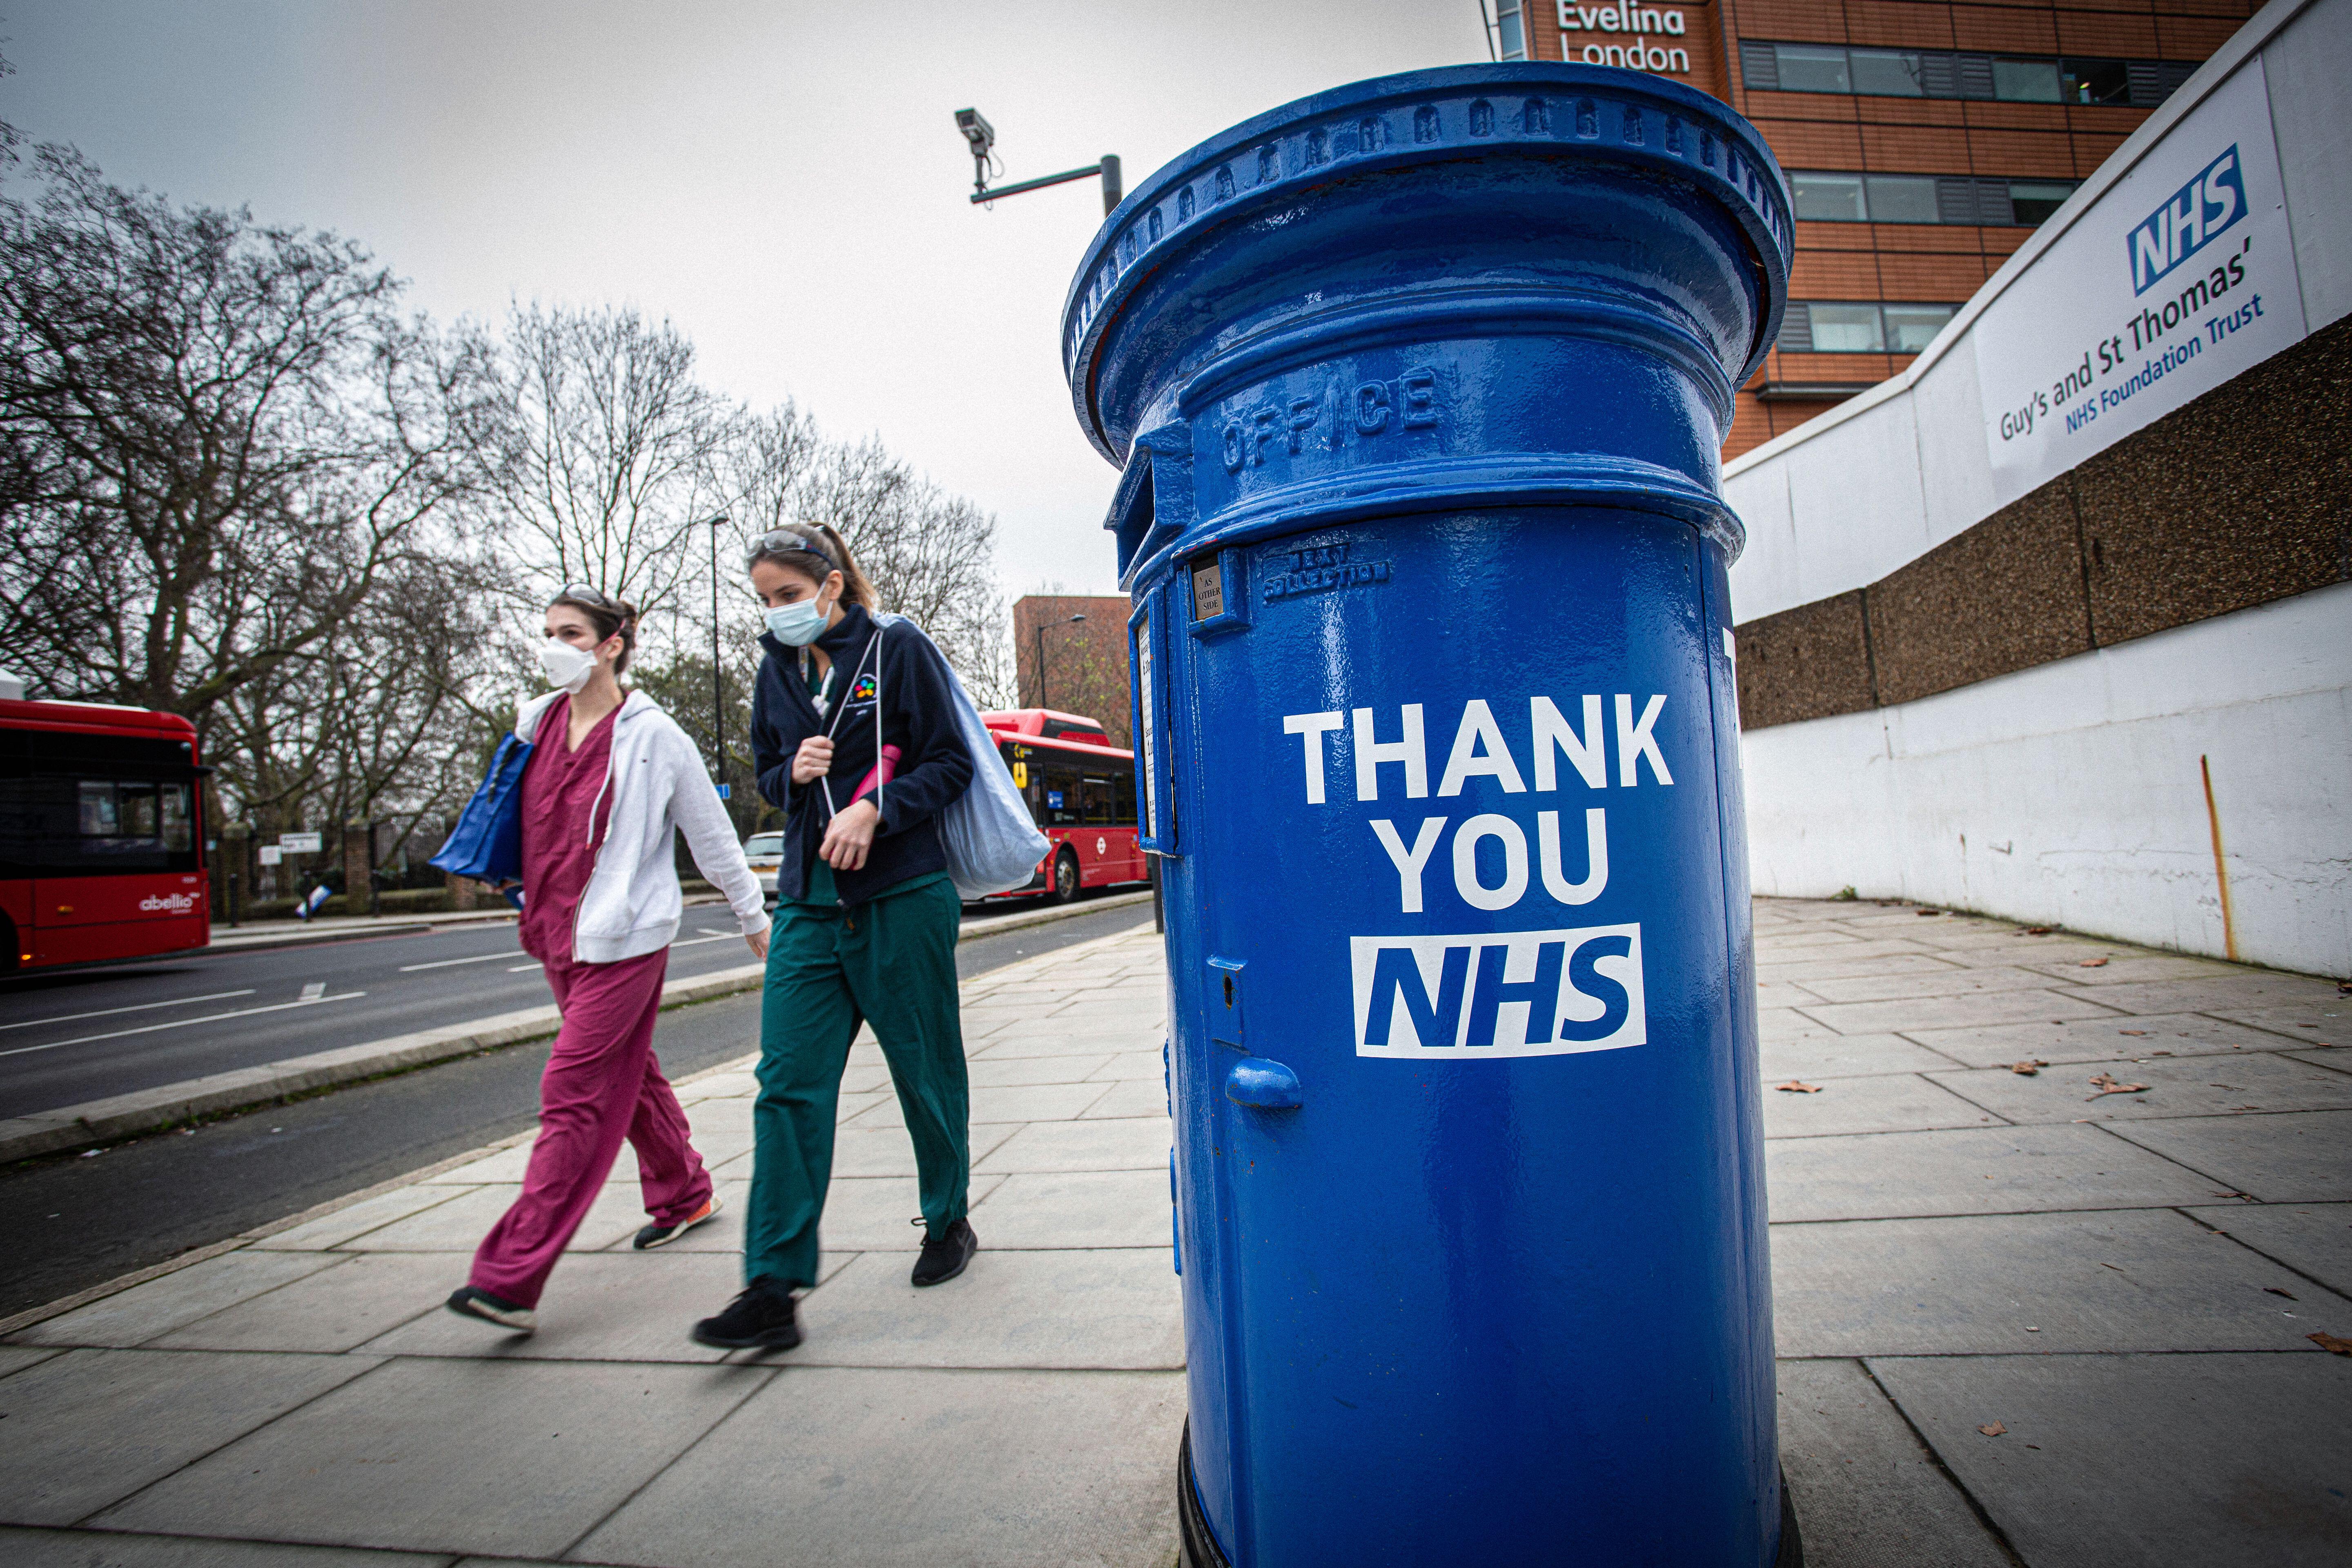 Nurses wearing a face masks walks past post box painted blue and carrying the message 'Thank You NHS' stands outside St Thomas' Hospital in London, UK